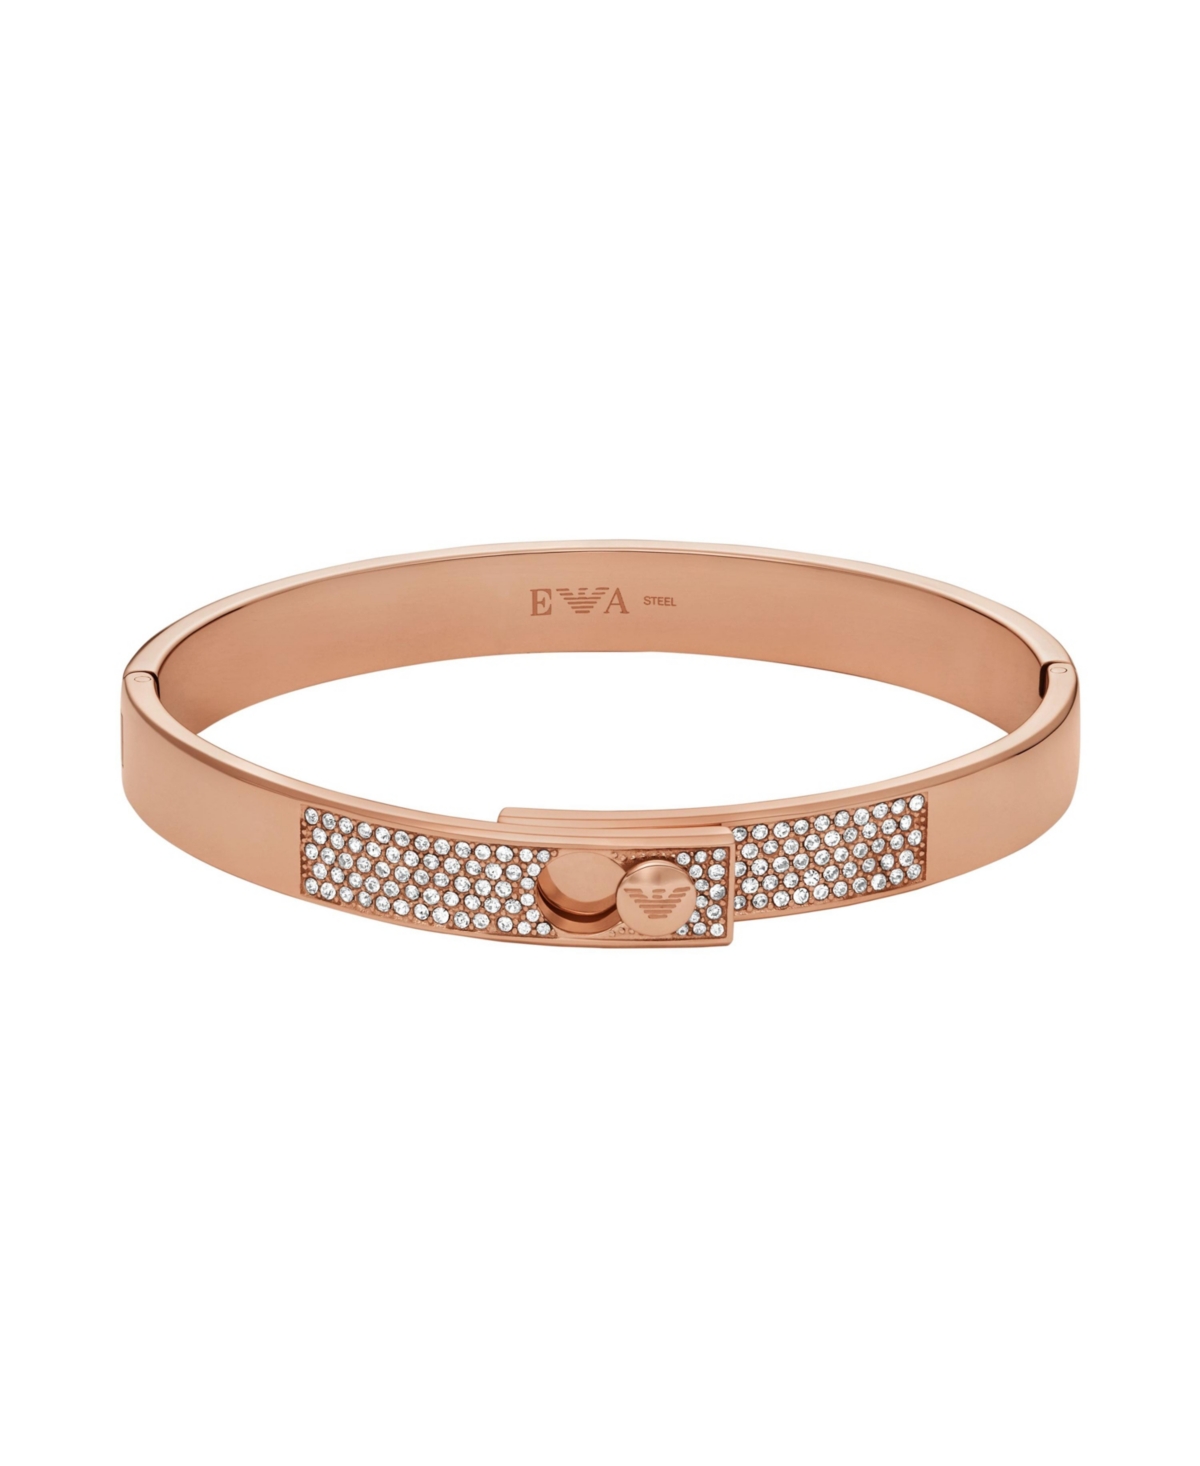 Women's Rose Gold-Tone Stainless Steel with Crystals Setted Bangle Bracelet, EGS3089221 - Copper